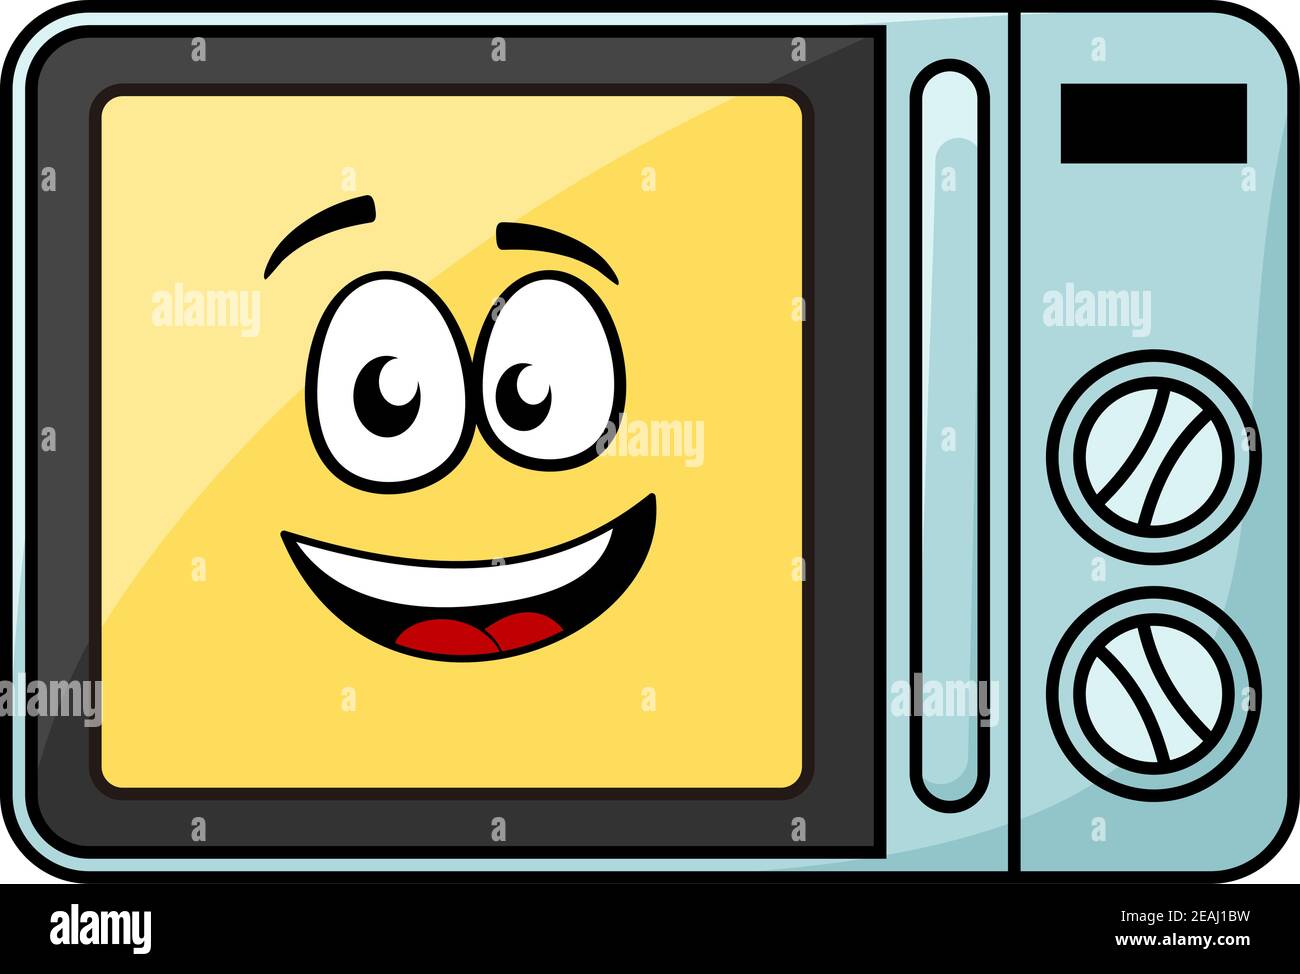 https://c8.alamy.com/comp/2EAJ1BW/cute-cartoon-microwave-oven-with-a-cheerful-yellow-smiling-face-behind-the-glass-door-vector-illustration-isolated-on-white-2EAJ1BW.jpg